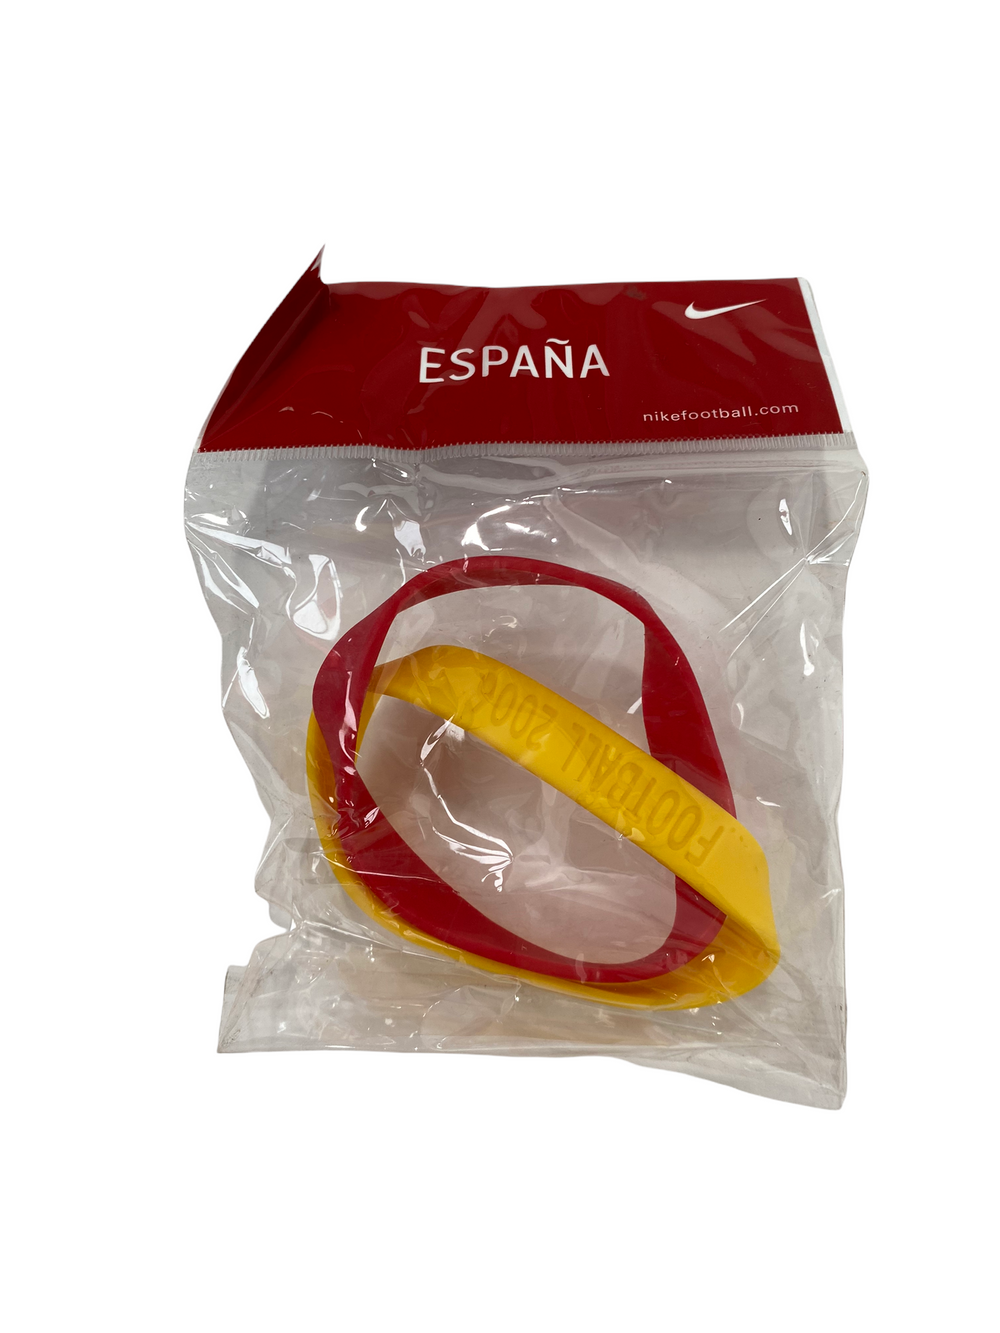 VINTAGE 2006 NIKE ADULTS UNISEX ESPANIA FOOTBALL SILICONE WRISTBANDS IN RED - Not In Your Wardrobe™ - [Vendor]